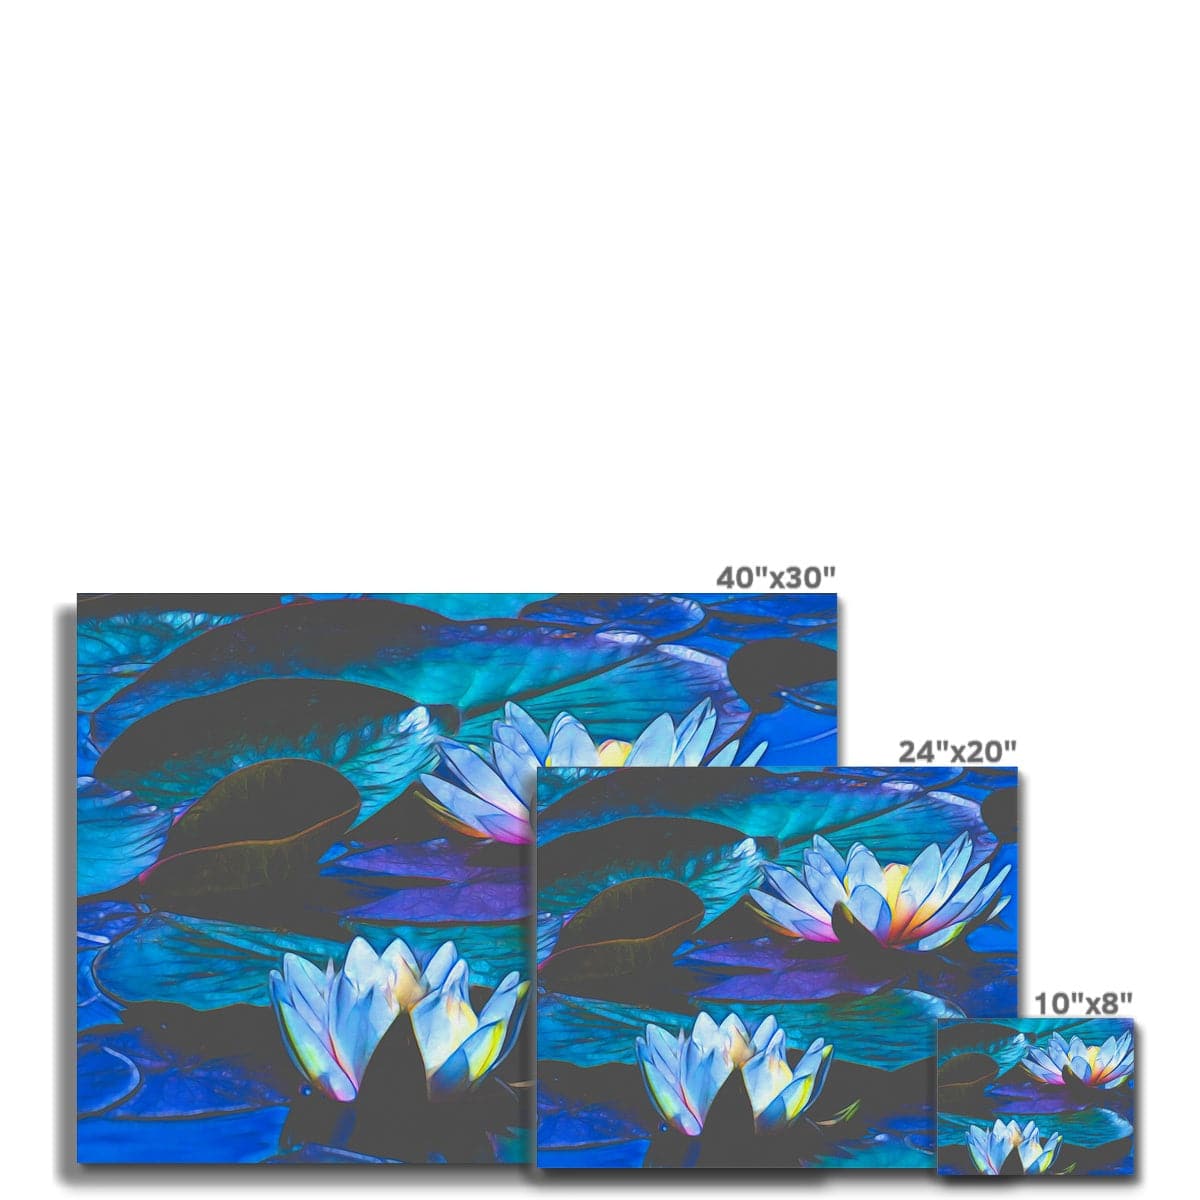 Blue waterlilies _3, by Mother Nature Art, Canvas